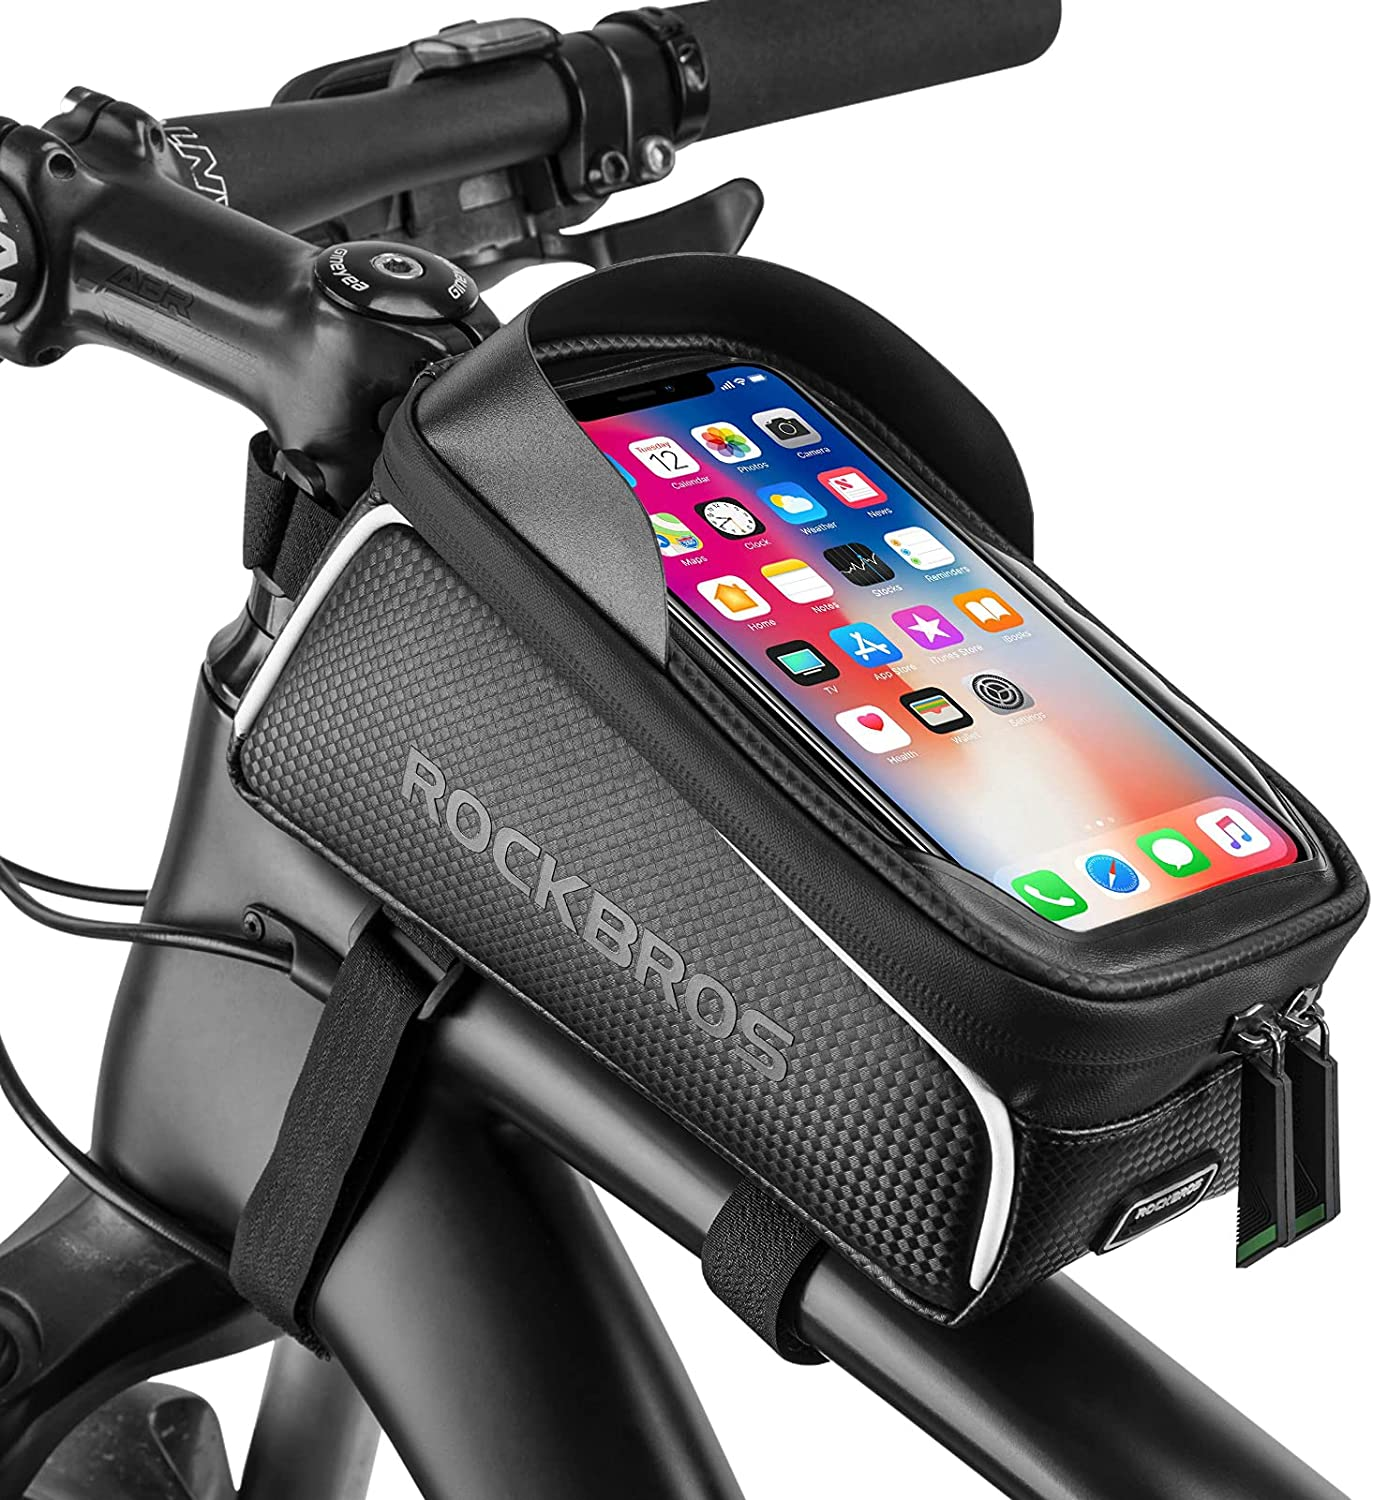 This tool bag offers you the convenience of having your phone's screen visible to you while keeping the phone protected on your ride.